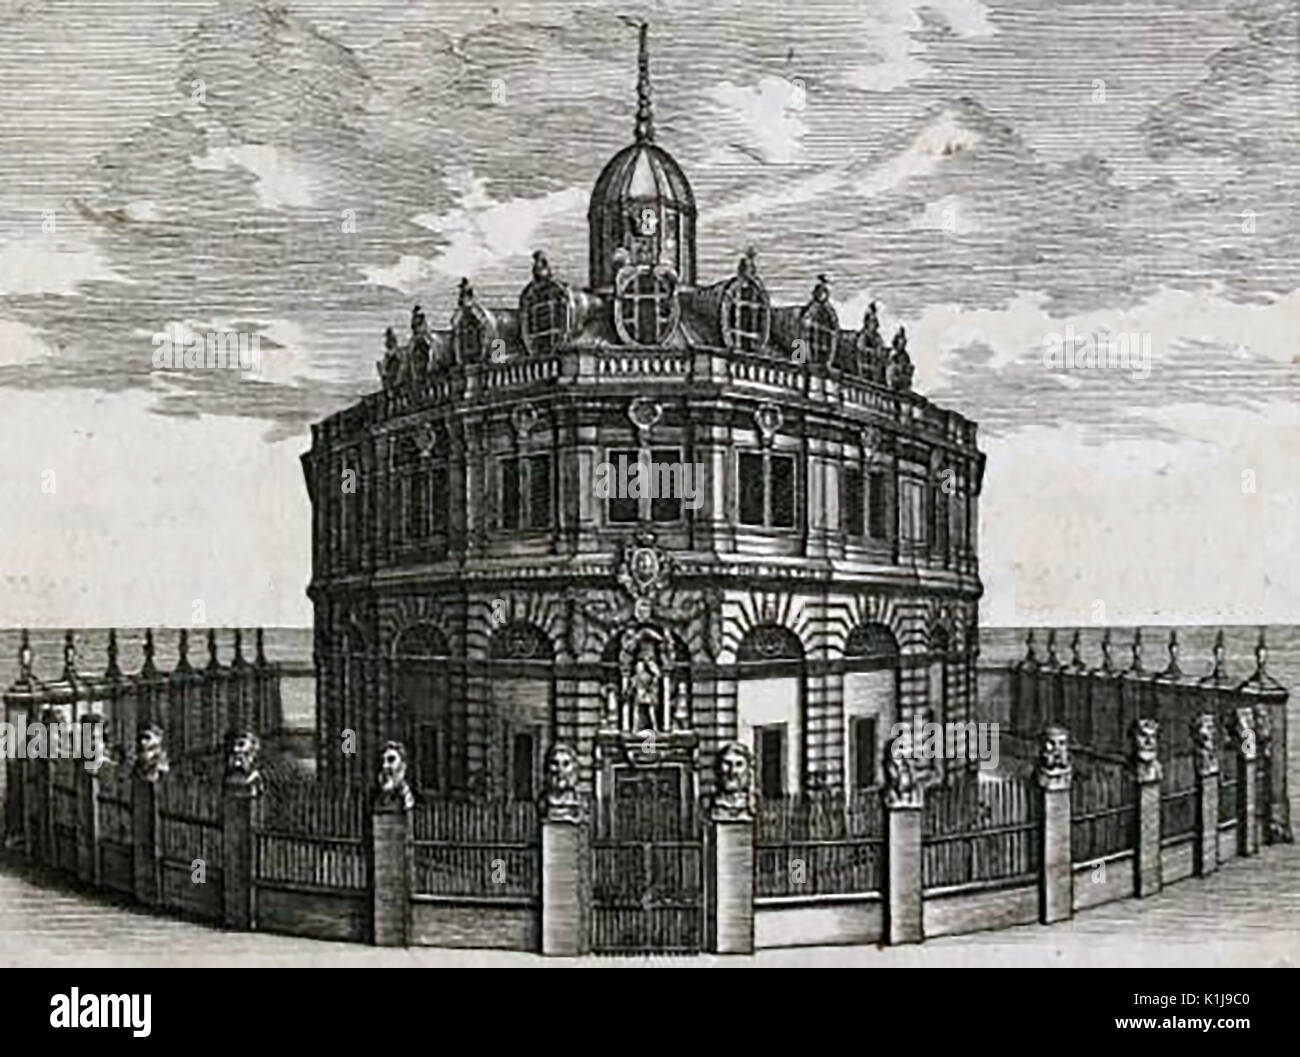 1720 engraving of a building in Oxford, remarkably similar in style to the later Radcliffe Camera (aka Rad Cam or The Camera) james Building built after 1737 Stock Photo